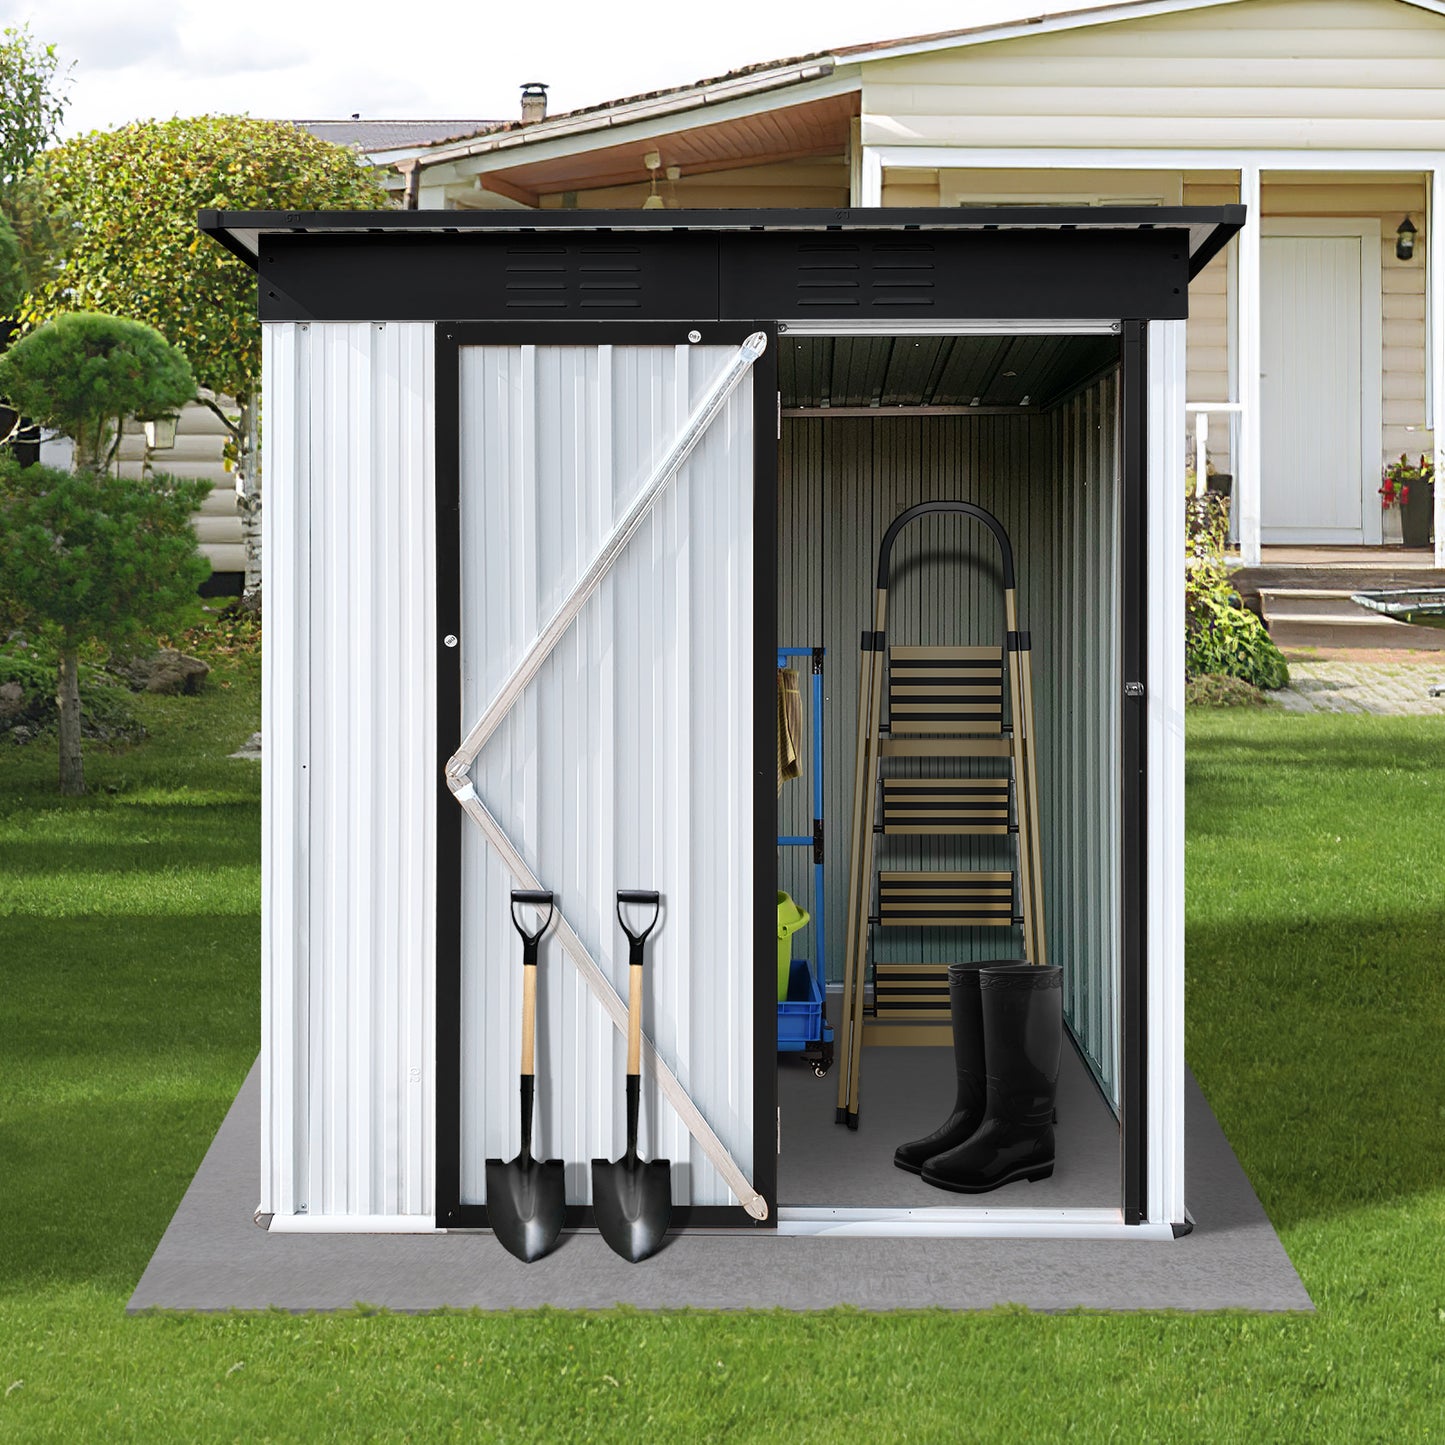 SYNGAR 6' x 4' Outdoor Metal Storage Shed, Tools Storage Shed, Galvanized Steel Garden Shed with Lockable Doors, Outdoor Storage Shed for Backyard, Patio, Lawn, D7806